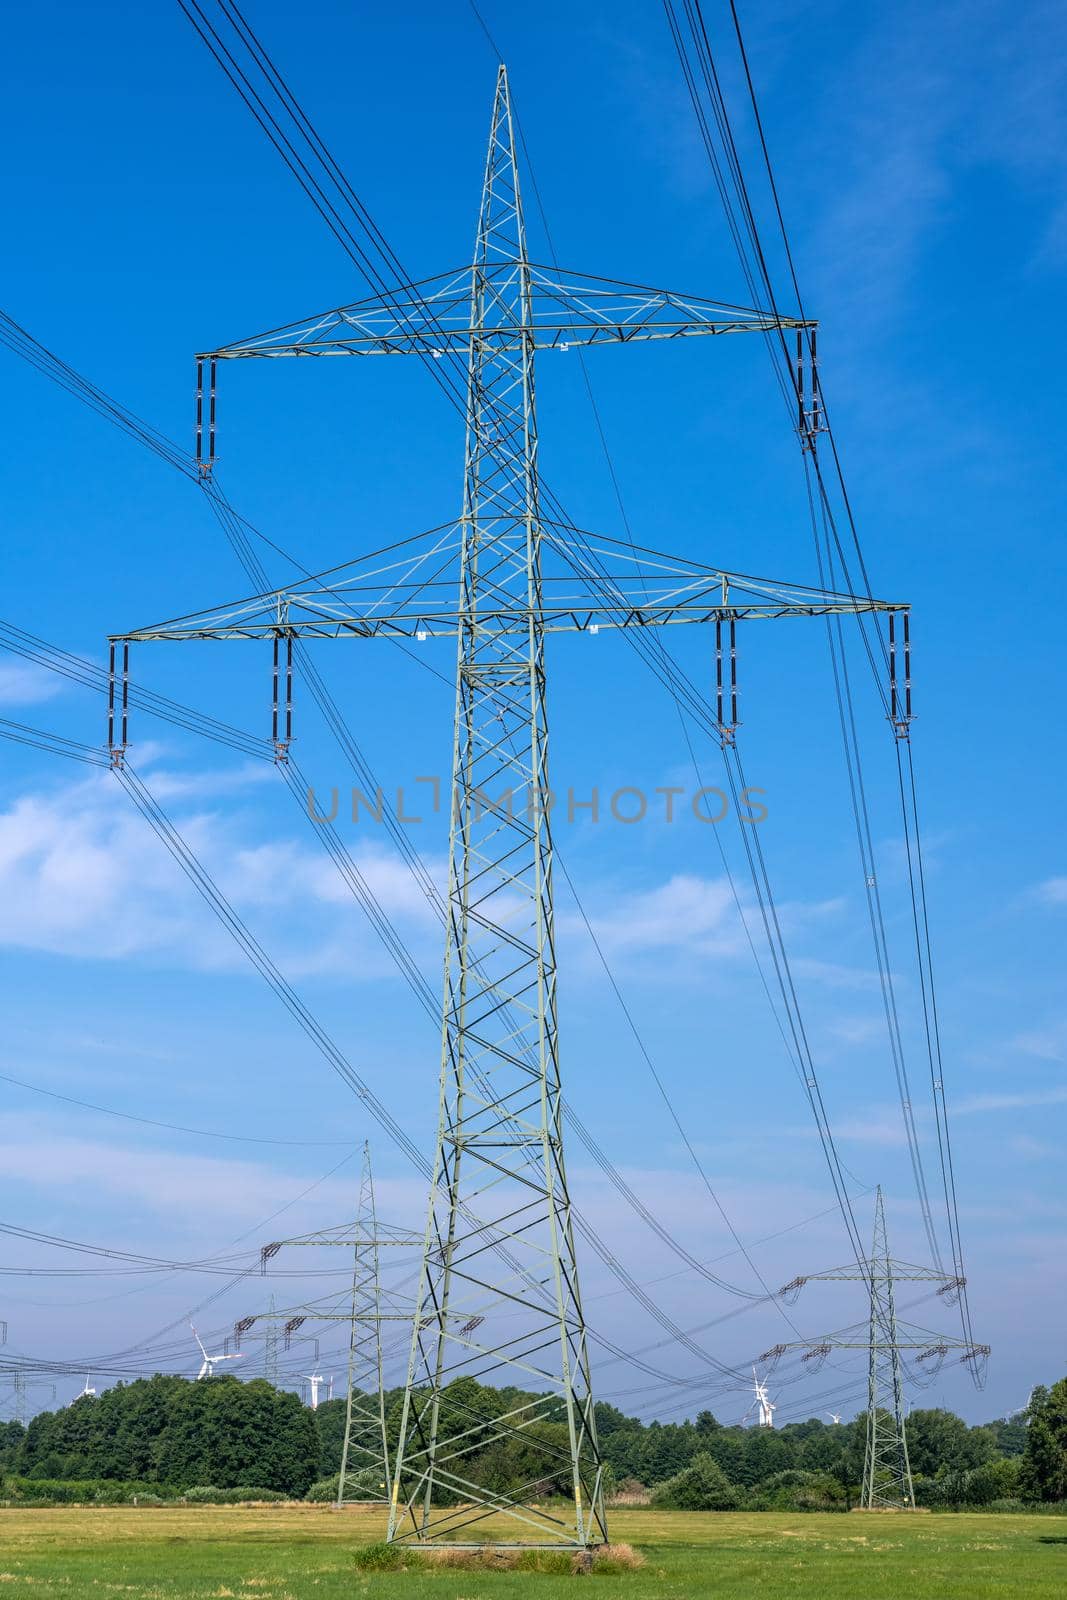 An electricity pylon in front of a blue sky seen in Germany